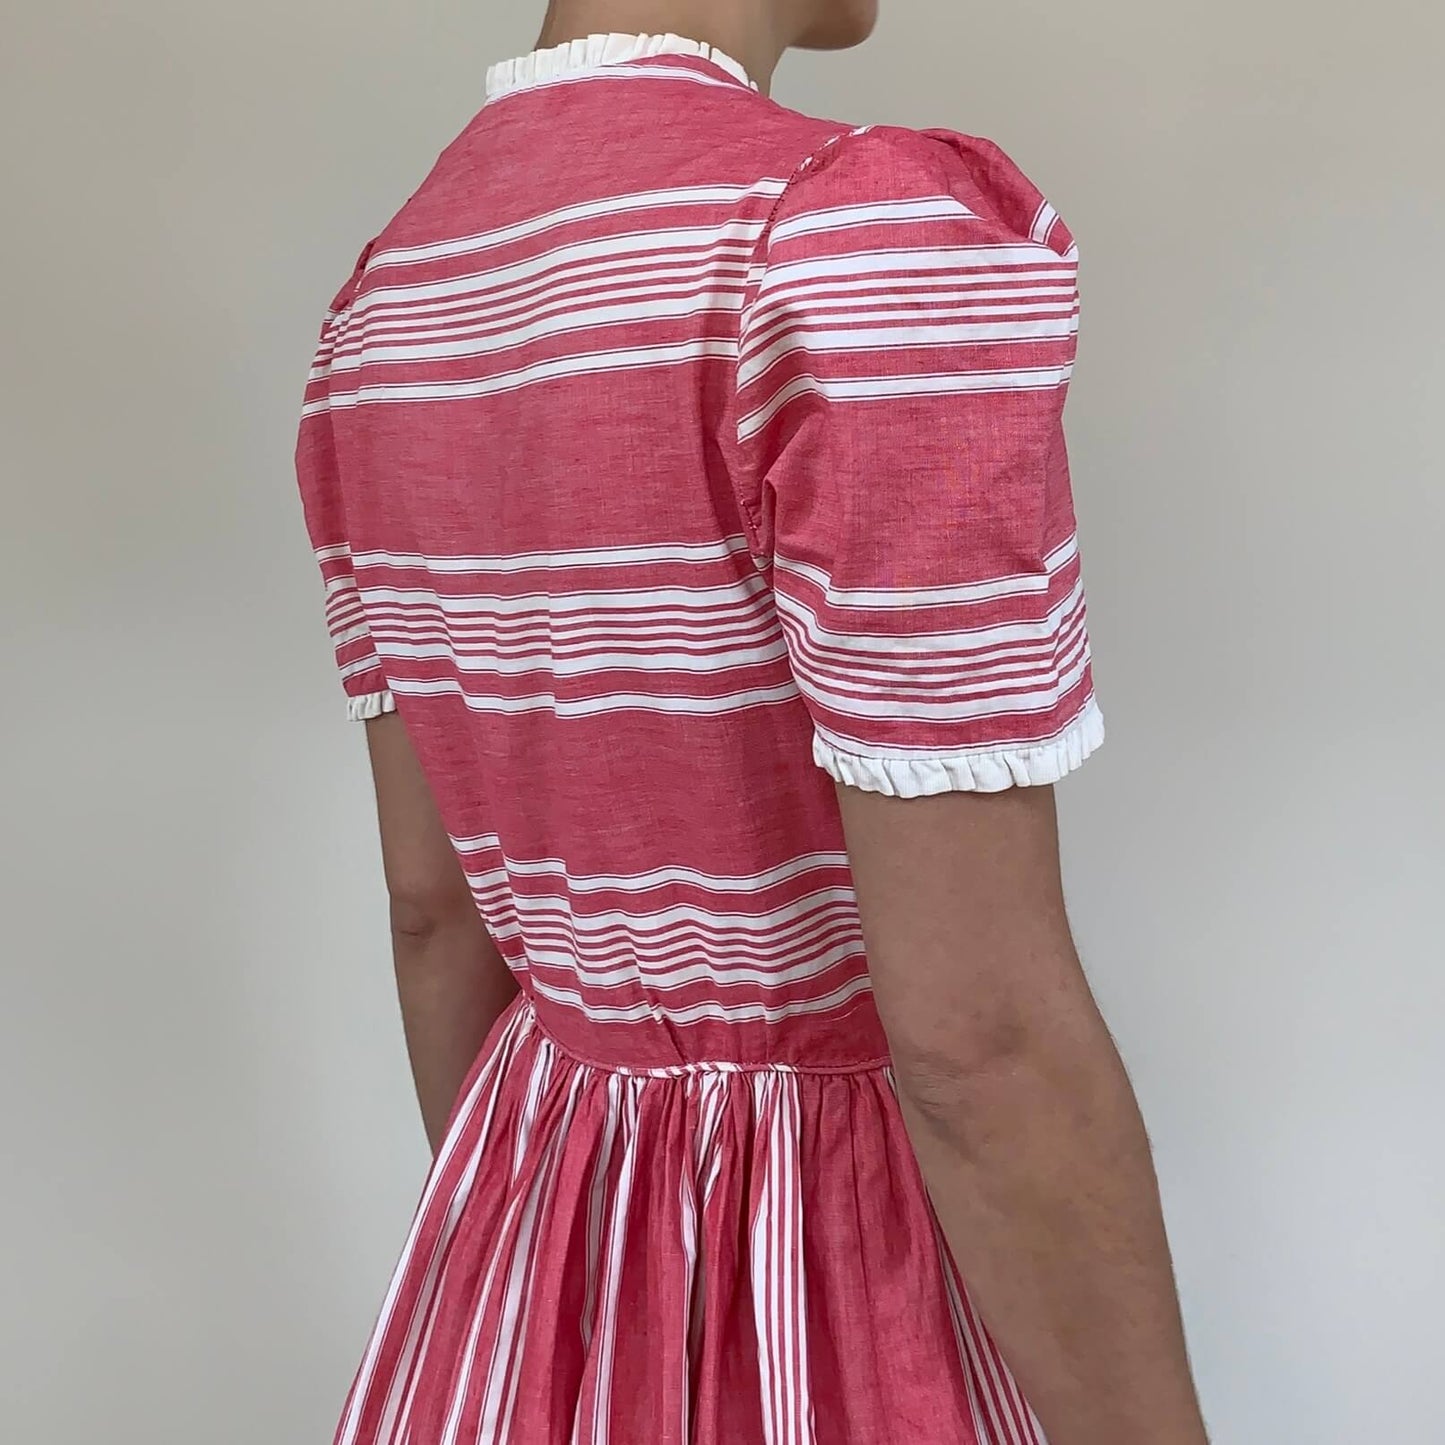 view showing the puff sleeves on the pink and white striped dress